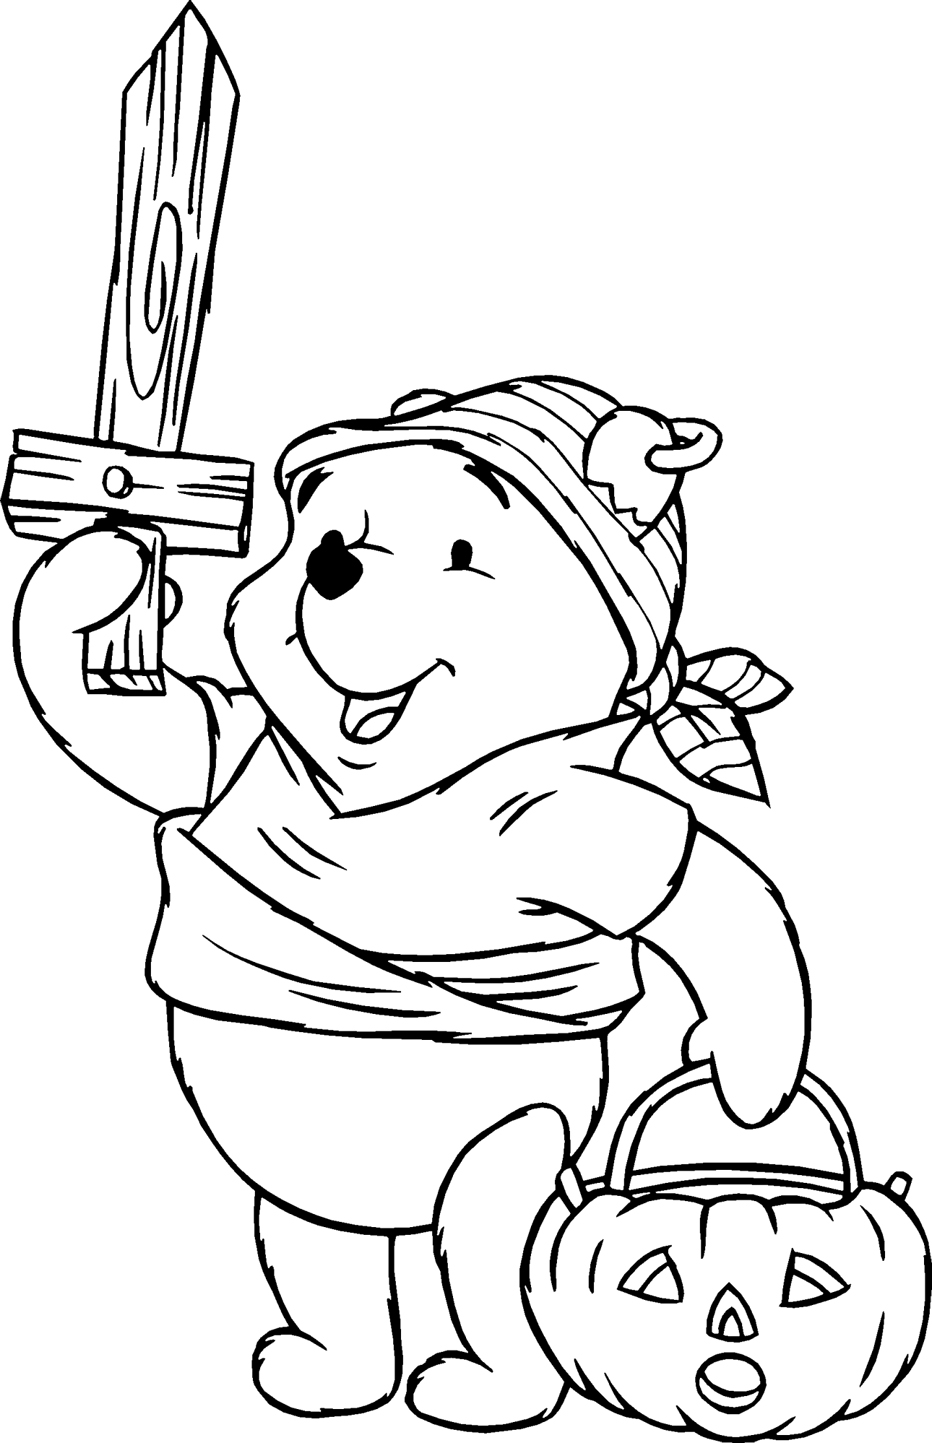 Coloring Pages To Color 4